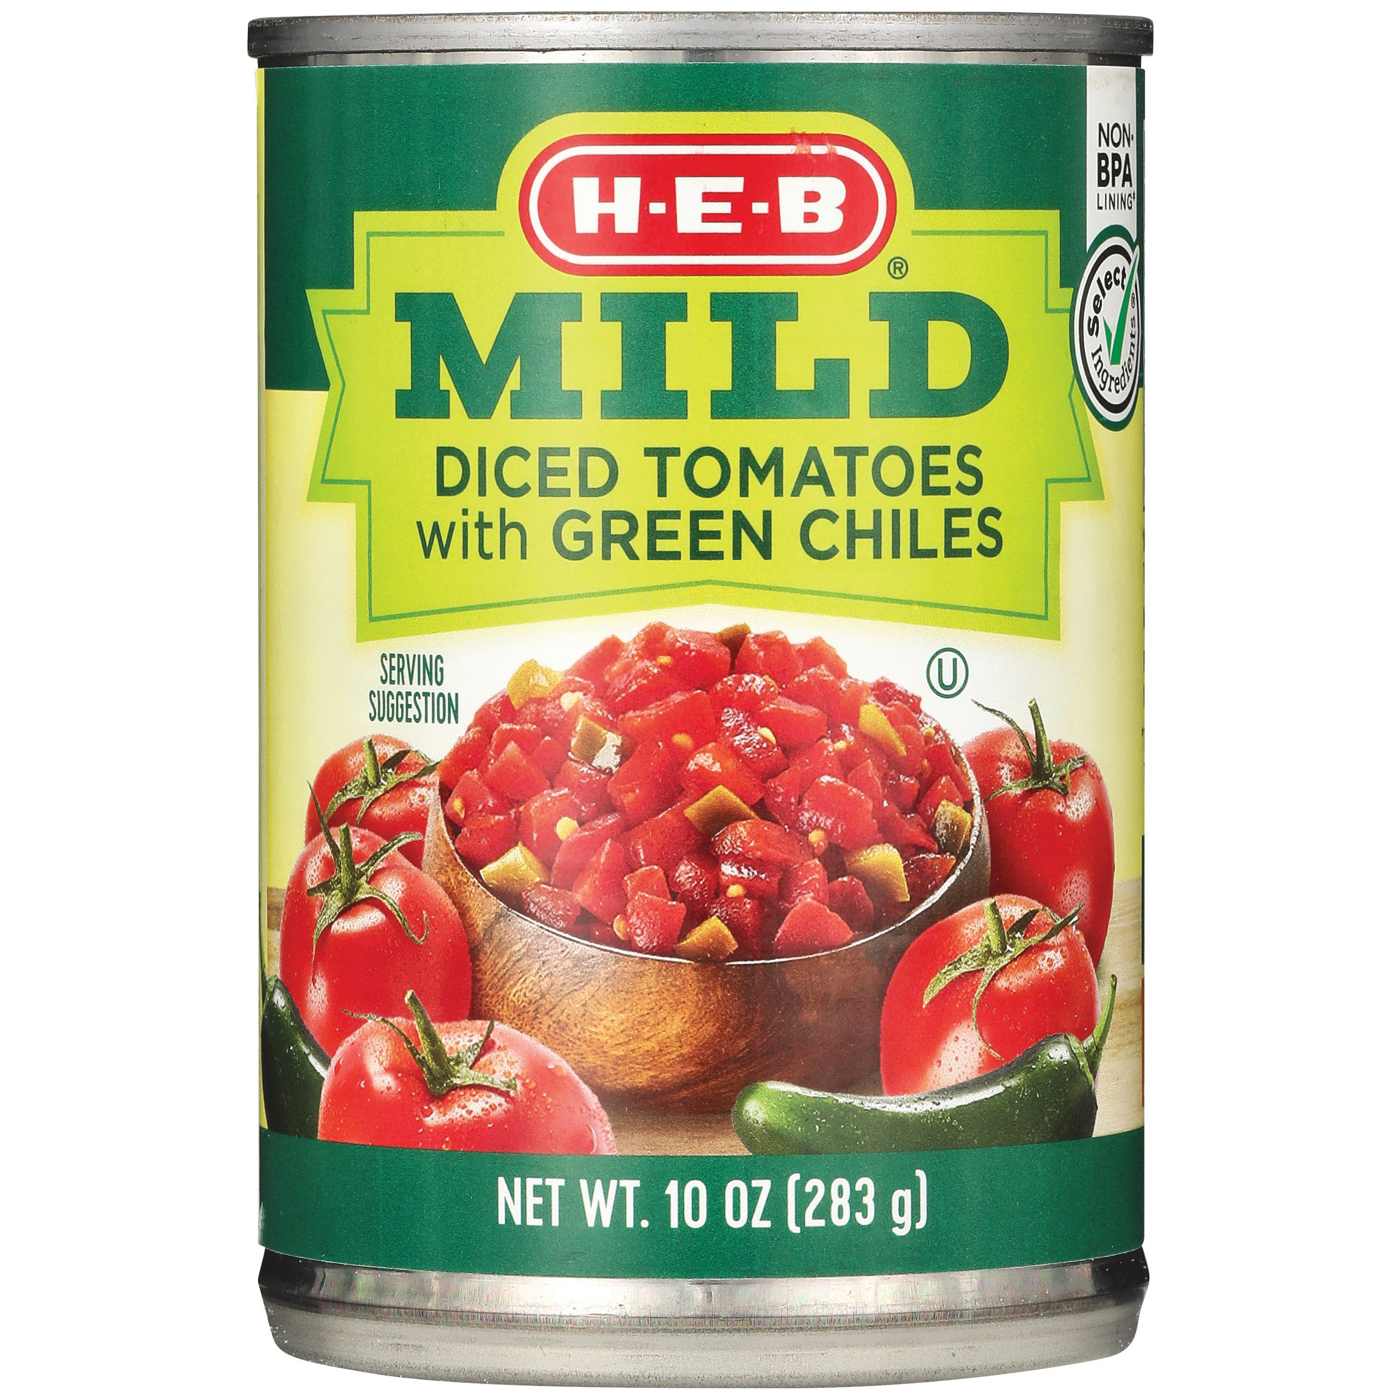 H-E-B Diced Tomatoes with Green Chiles - Mild; image 1 of 2